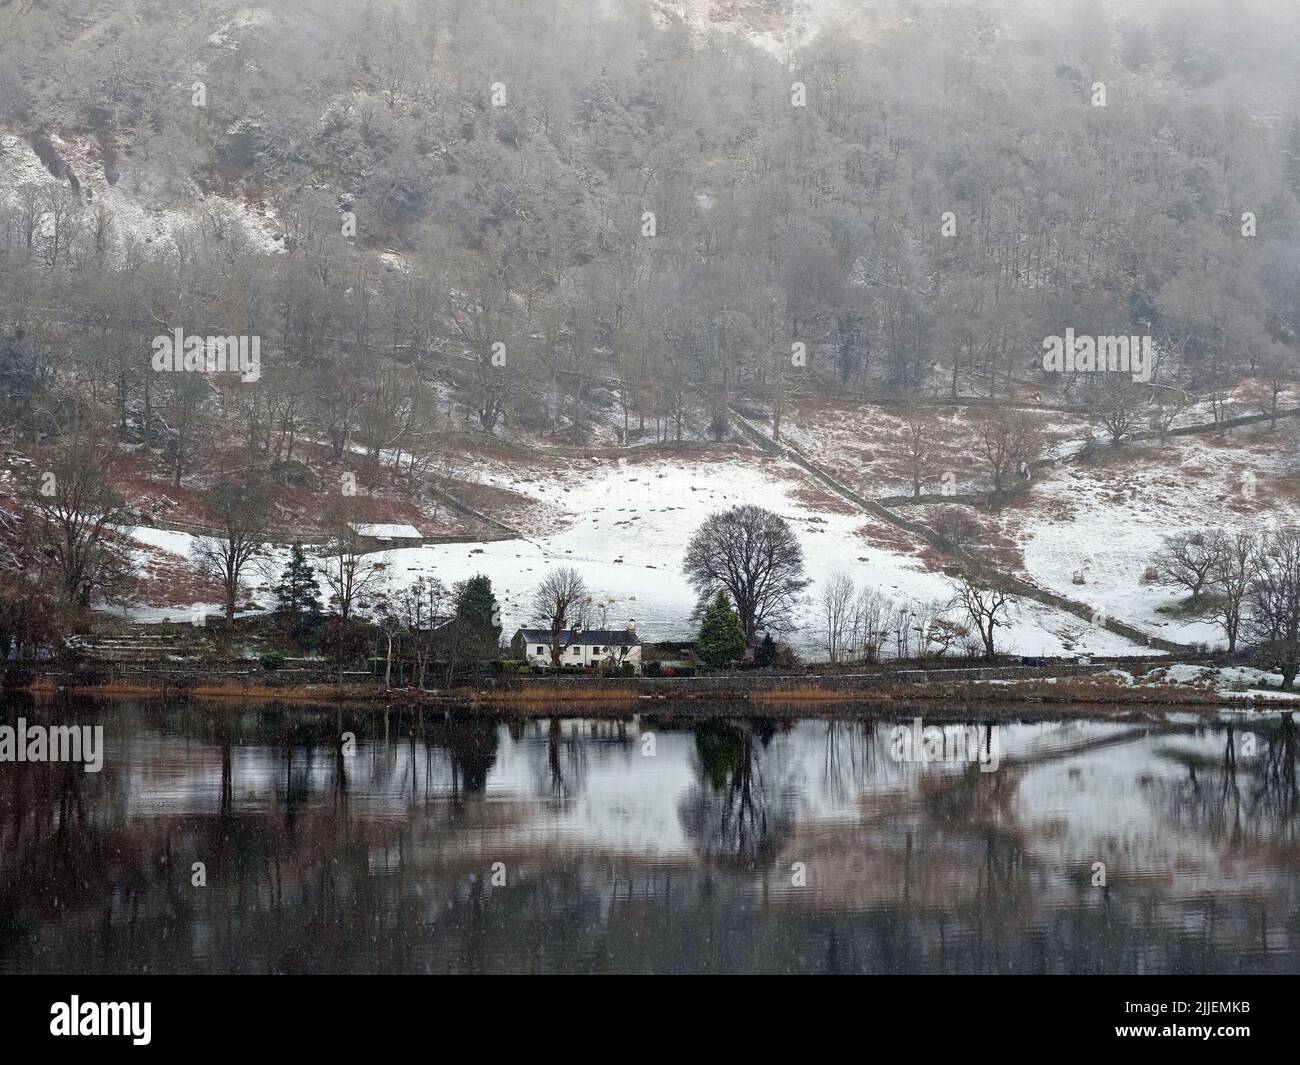 historic literary home Nab Cottage reflected on snowy shore of Rydal Water in wintry weather with bare alder trees near Grasmere, Cumbria, England, UK Stock Photo